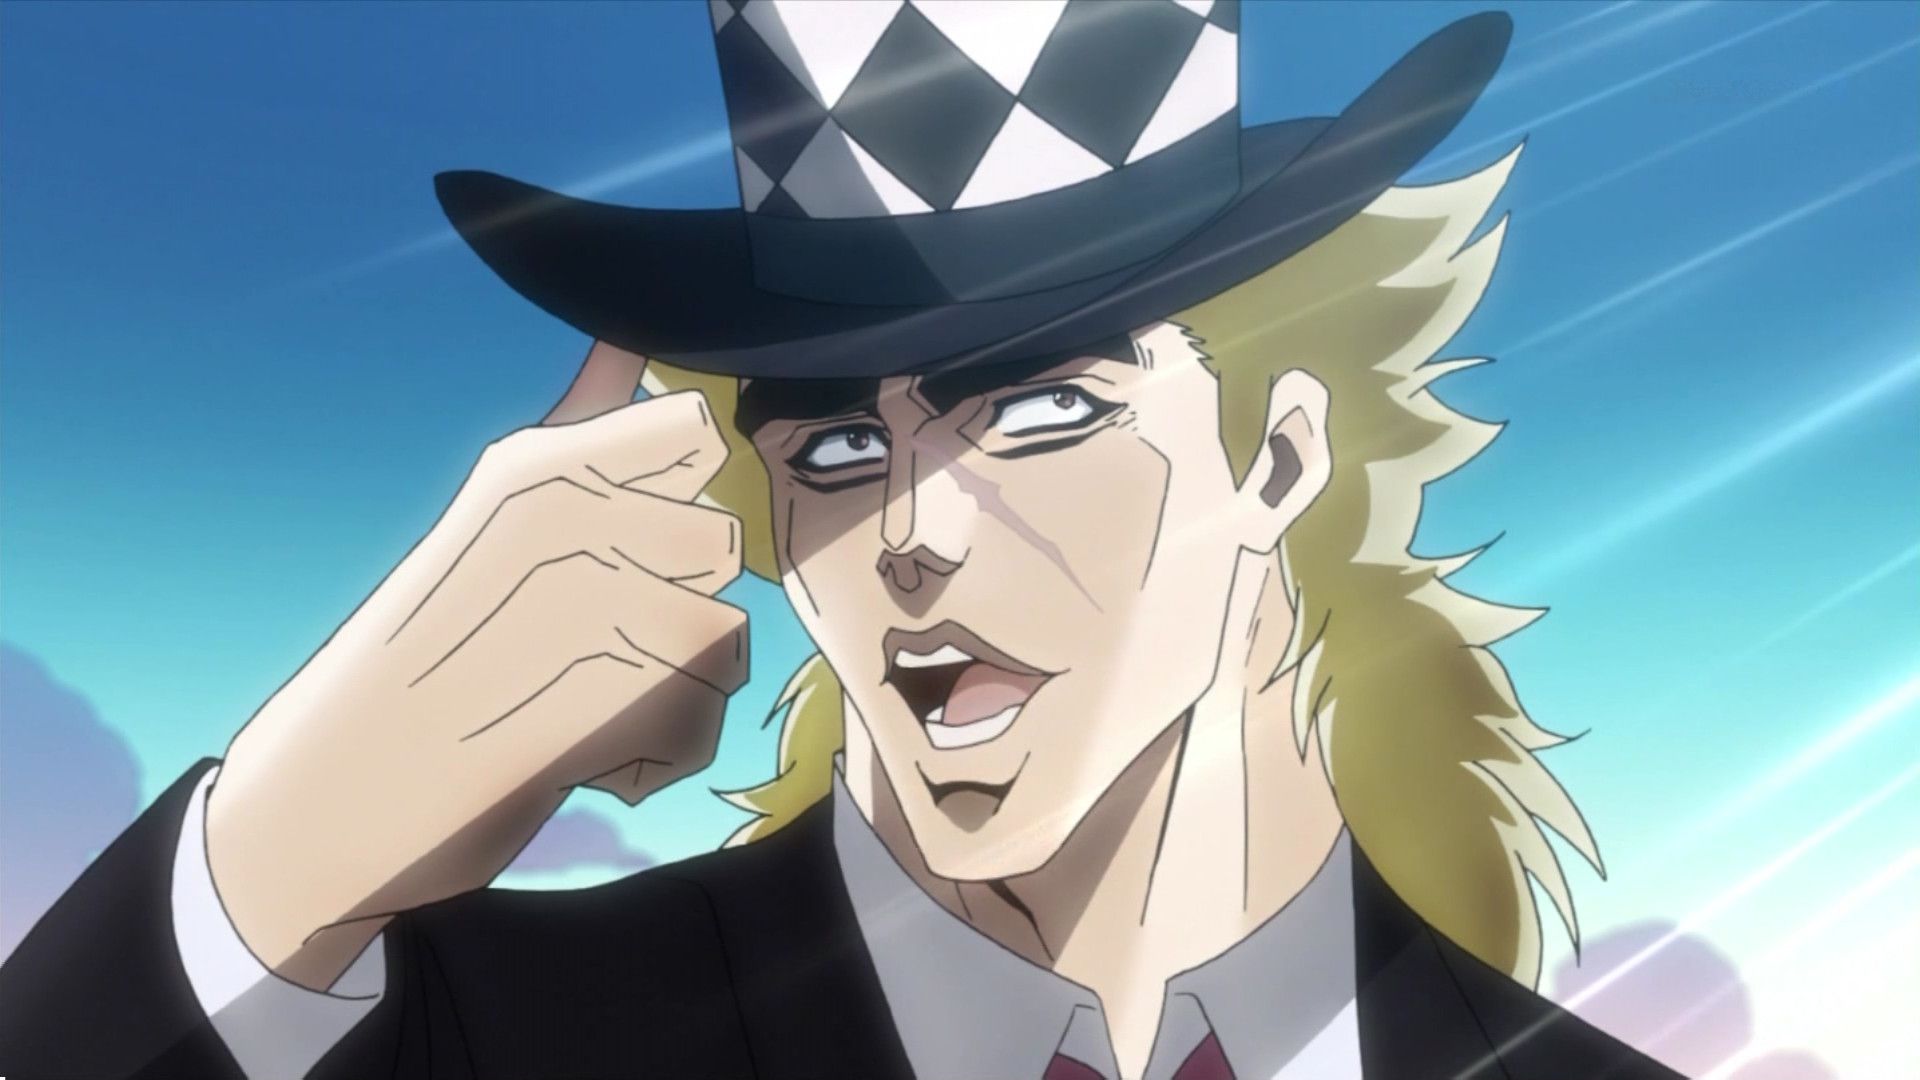 Jojo: The sleek Speedwagon comes to life in a fantastic female cosplay